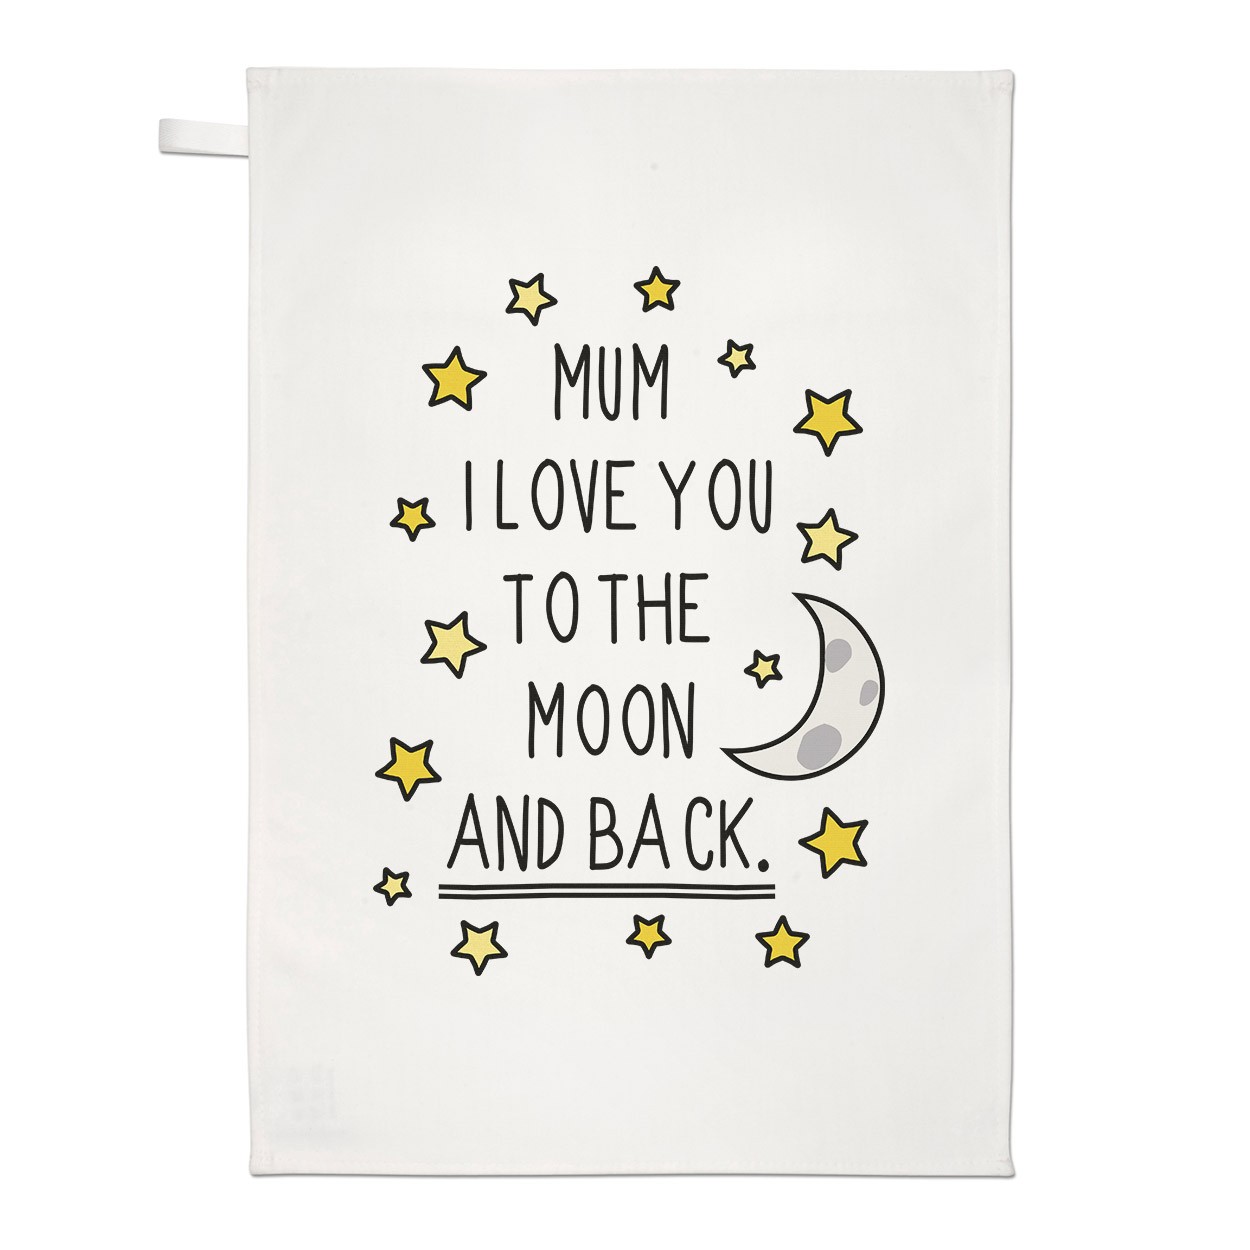 Mum I Love You To The Moon And Back Tea Towel Dish Cloth